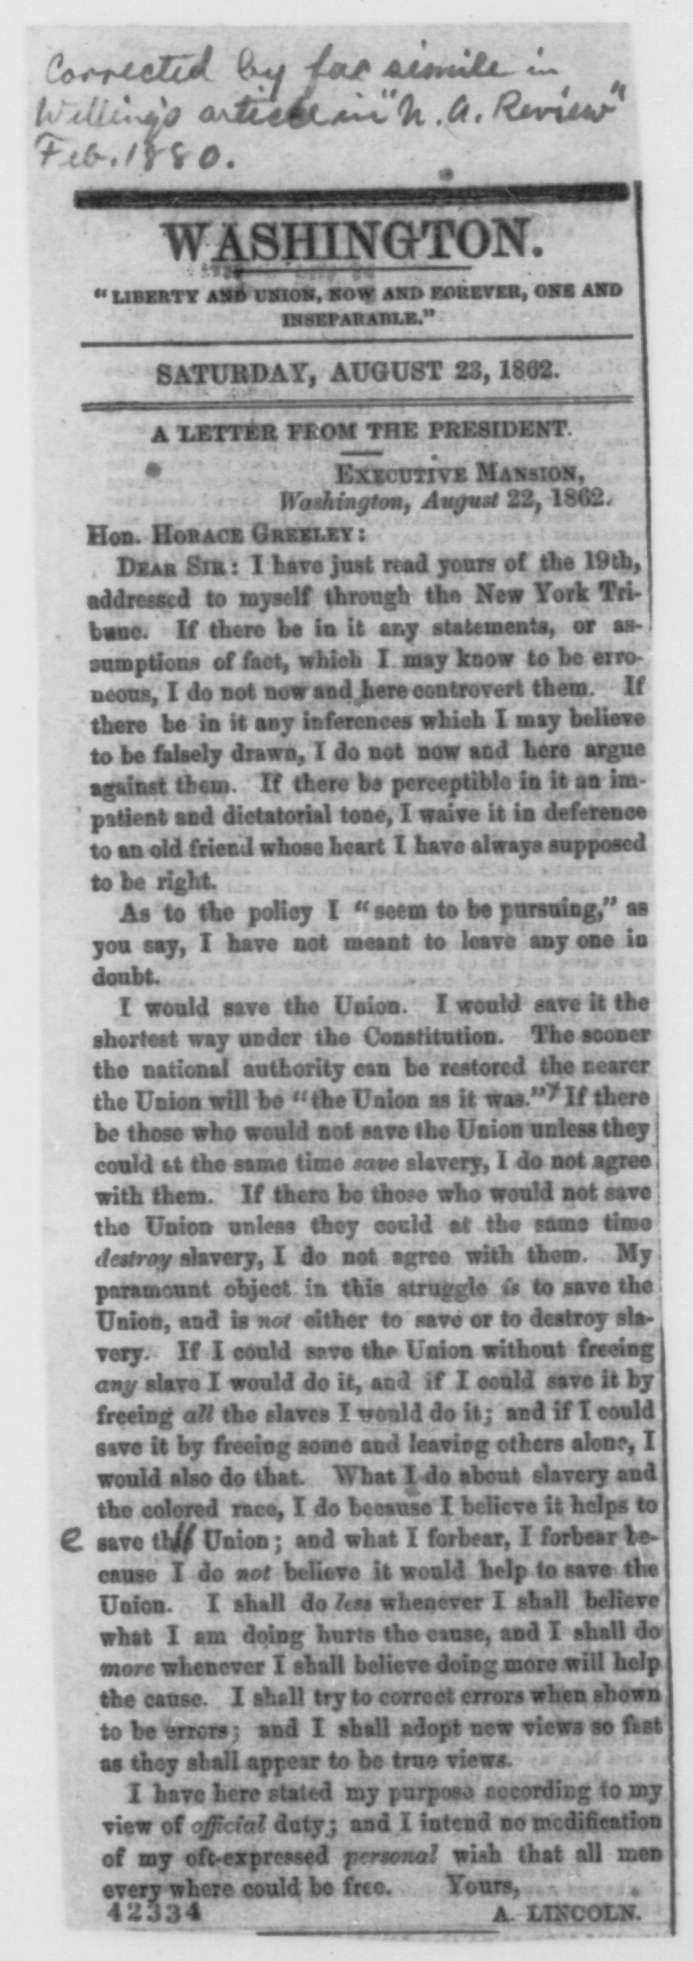 Document B Abraham Lincoln to Horace Greeley, Friday, August 22, 1862 (Clipping from Aug. 23, 1862 New York Tribune) Library of Congress 1. What is the policy Lincoln seem[s] to be pursuing? 2. What does Lincoln state is his official duty?